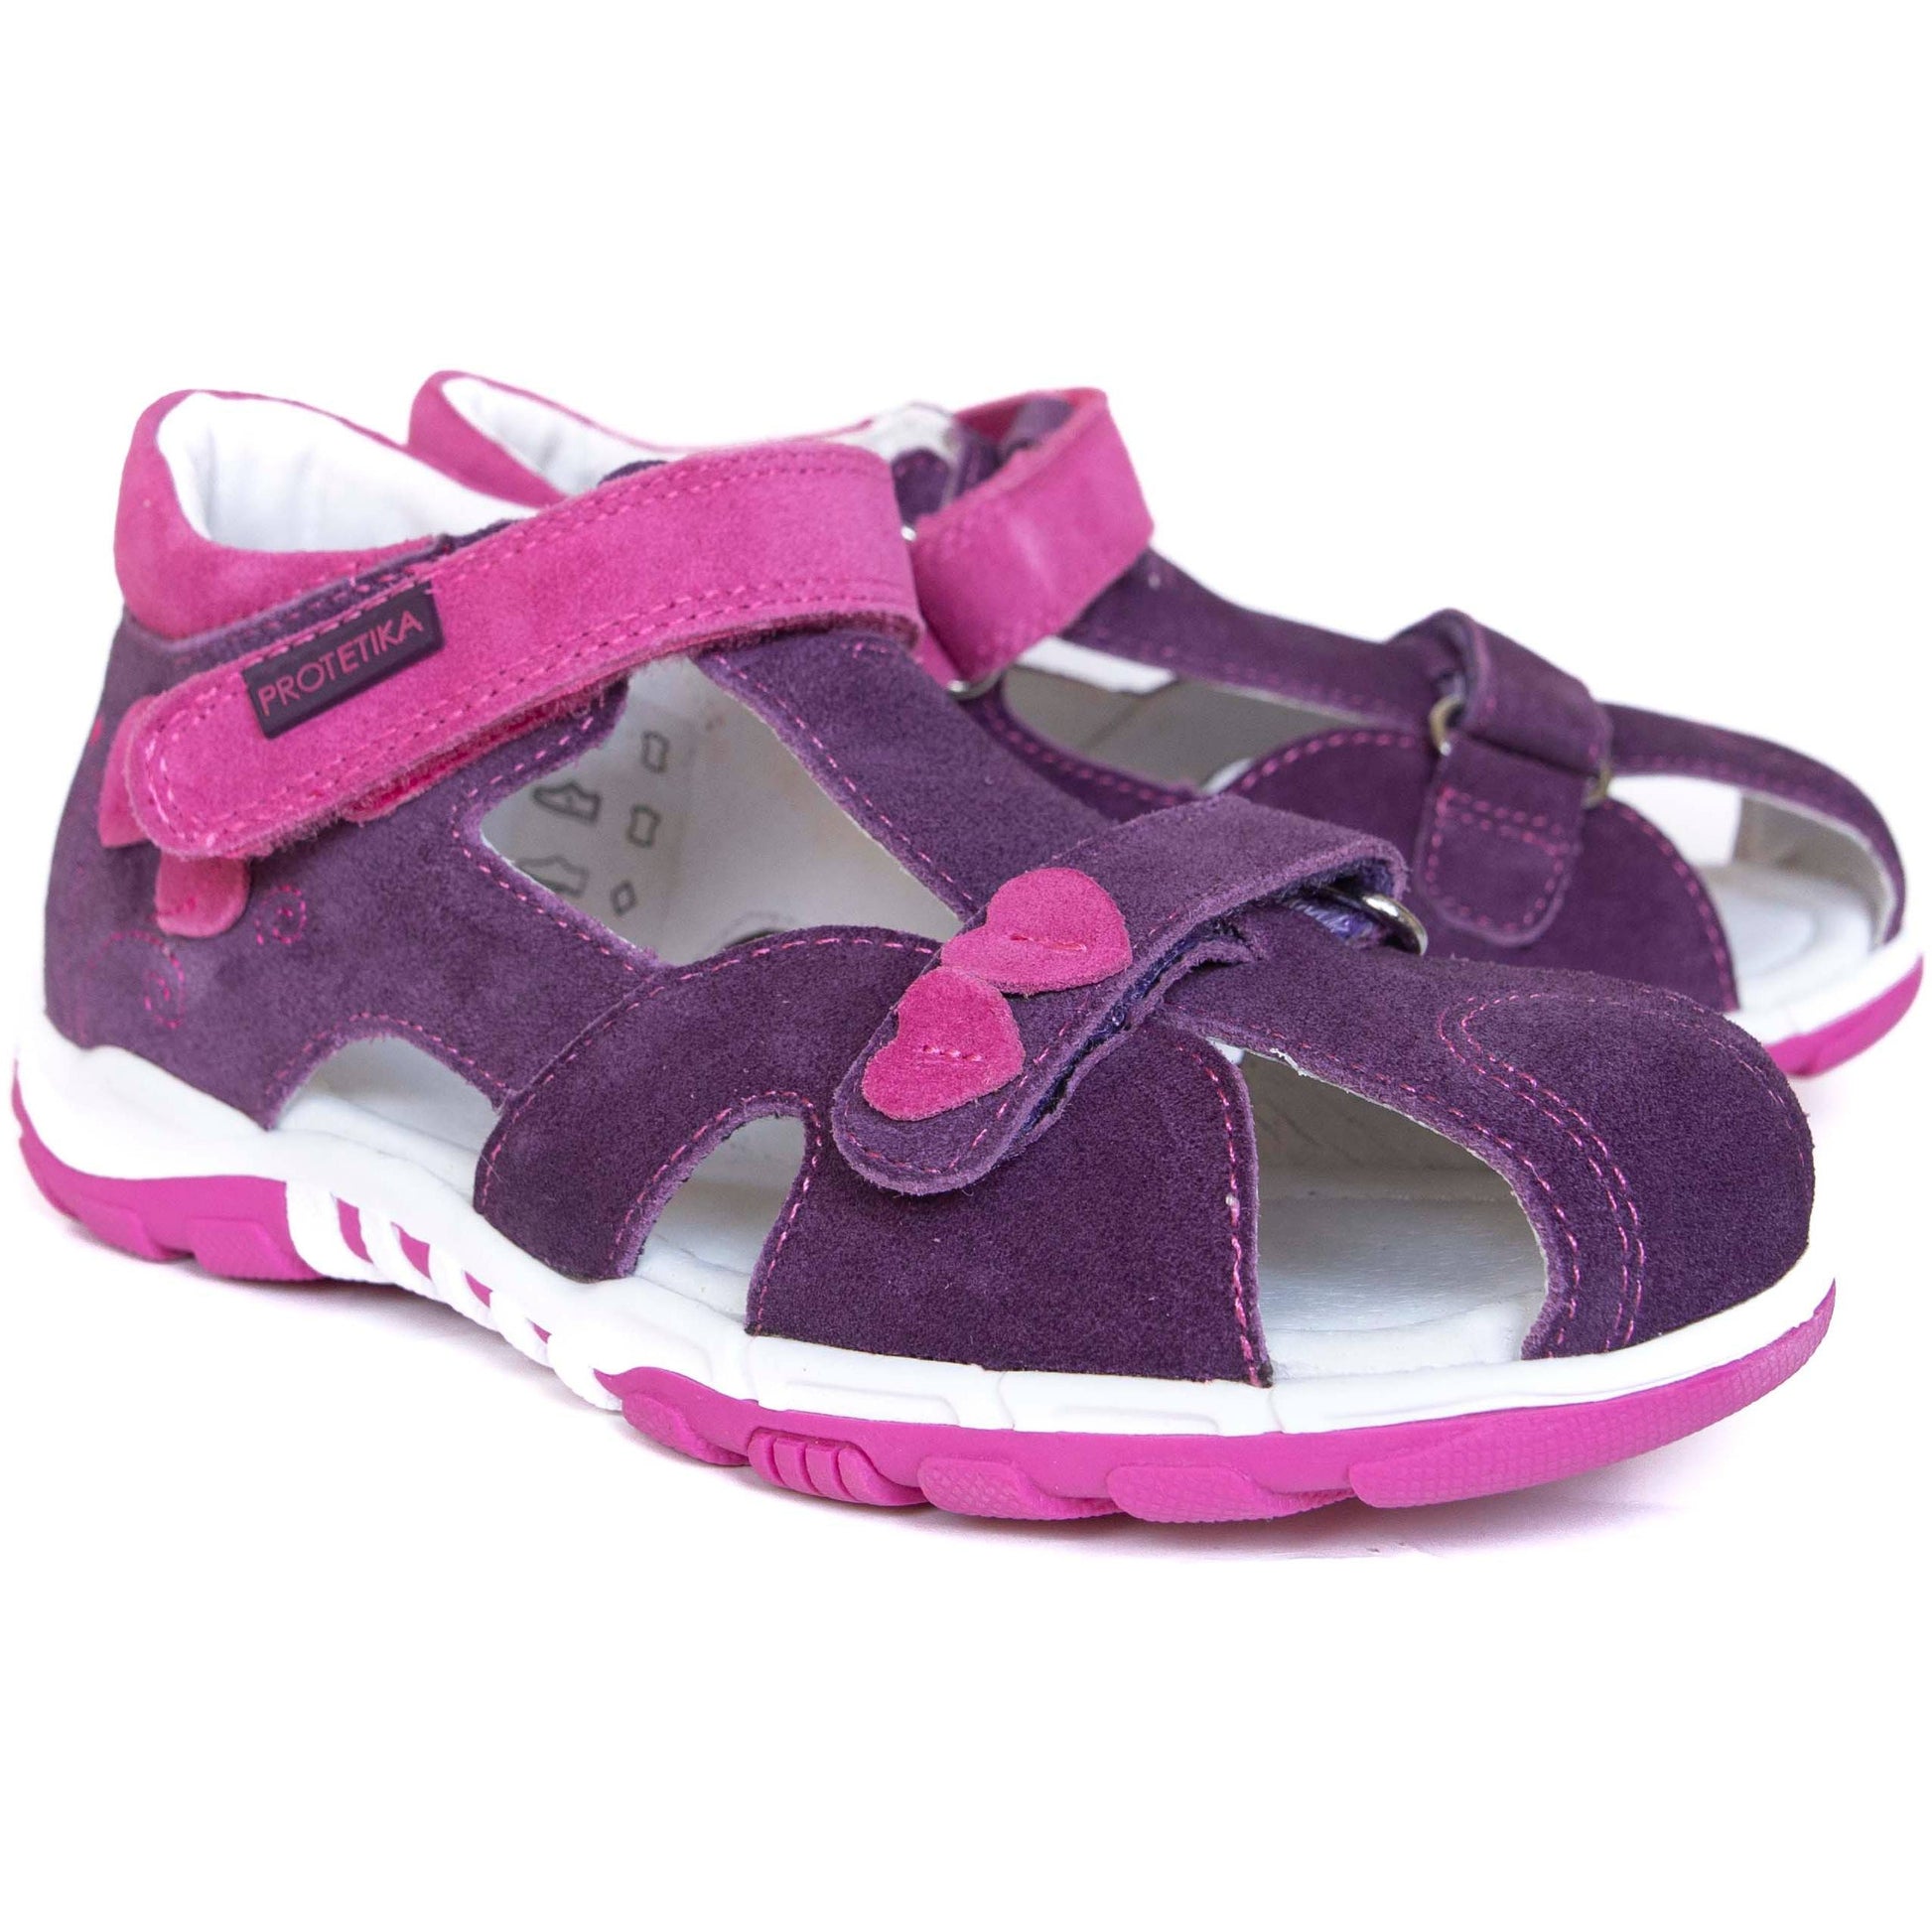 DARBY older girls arch support sandals - feelgoodshoes.ae